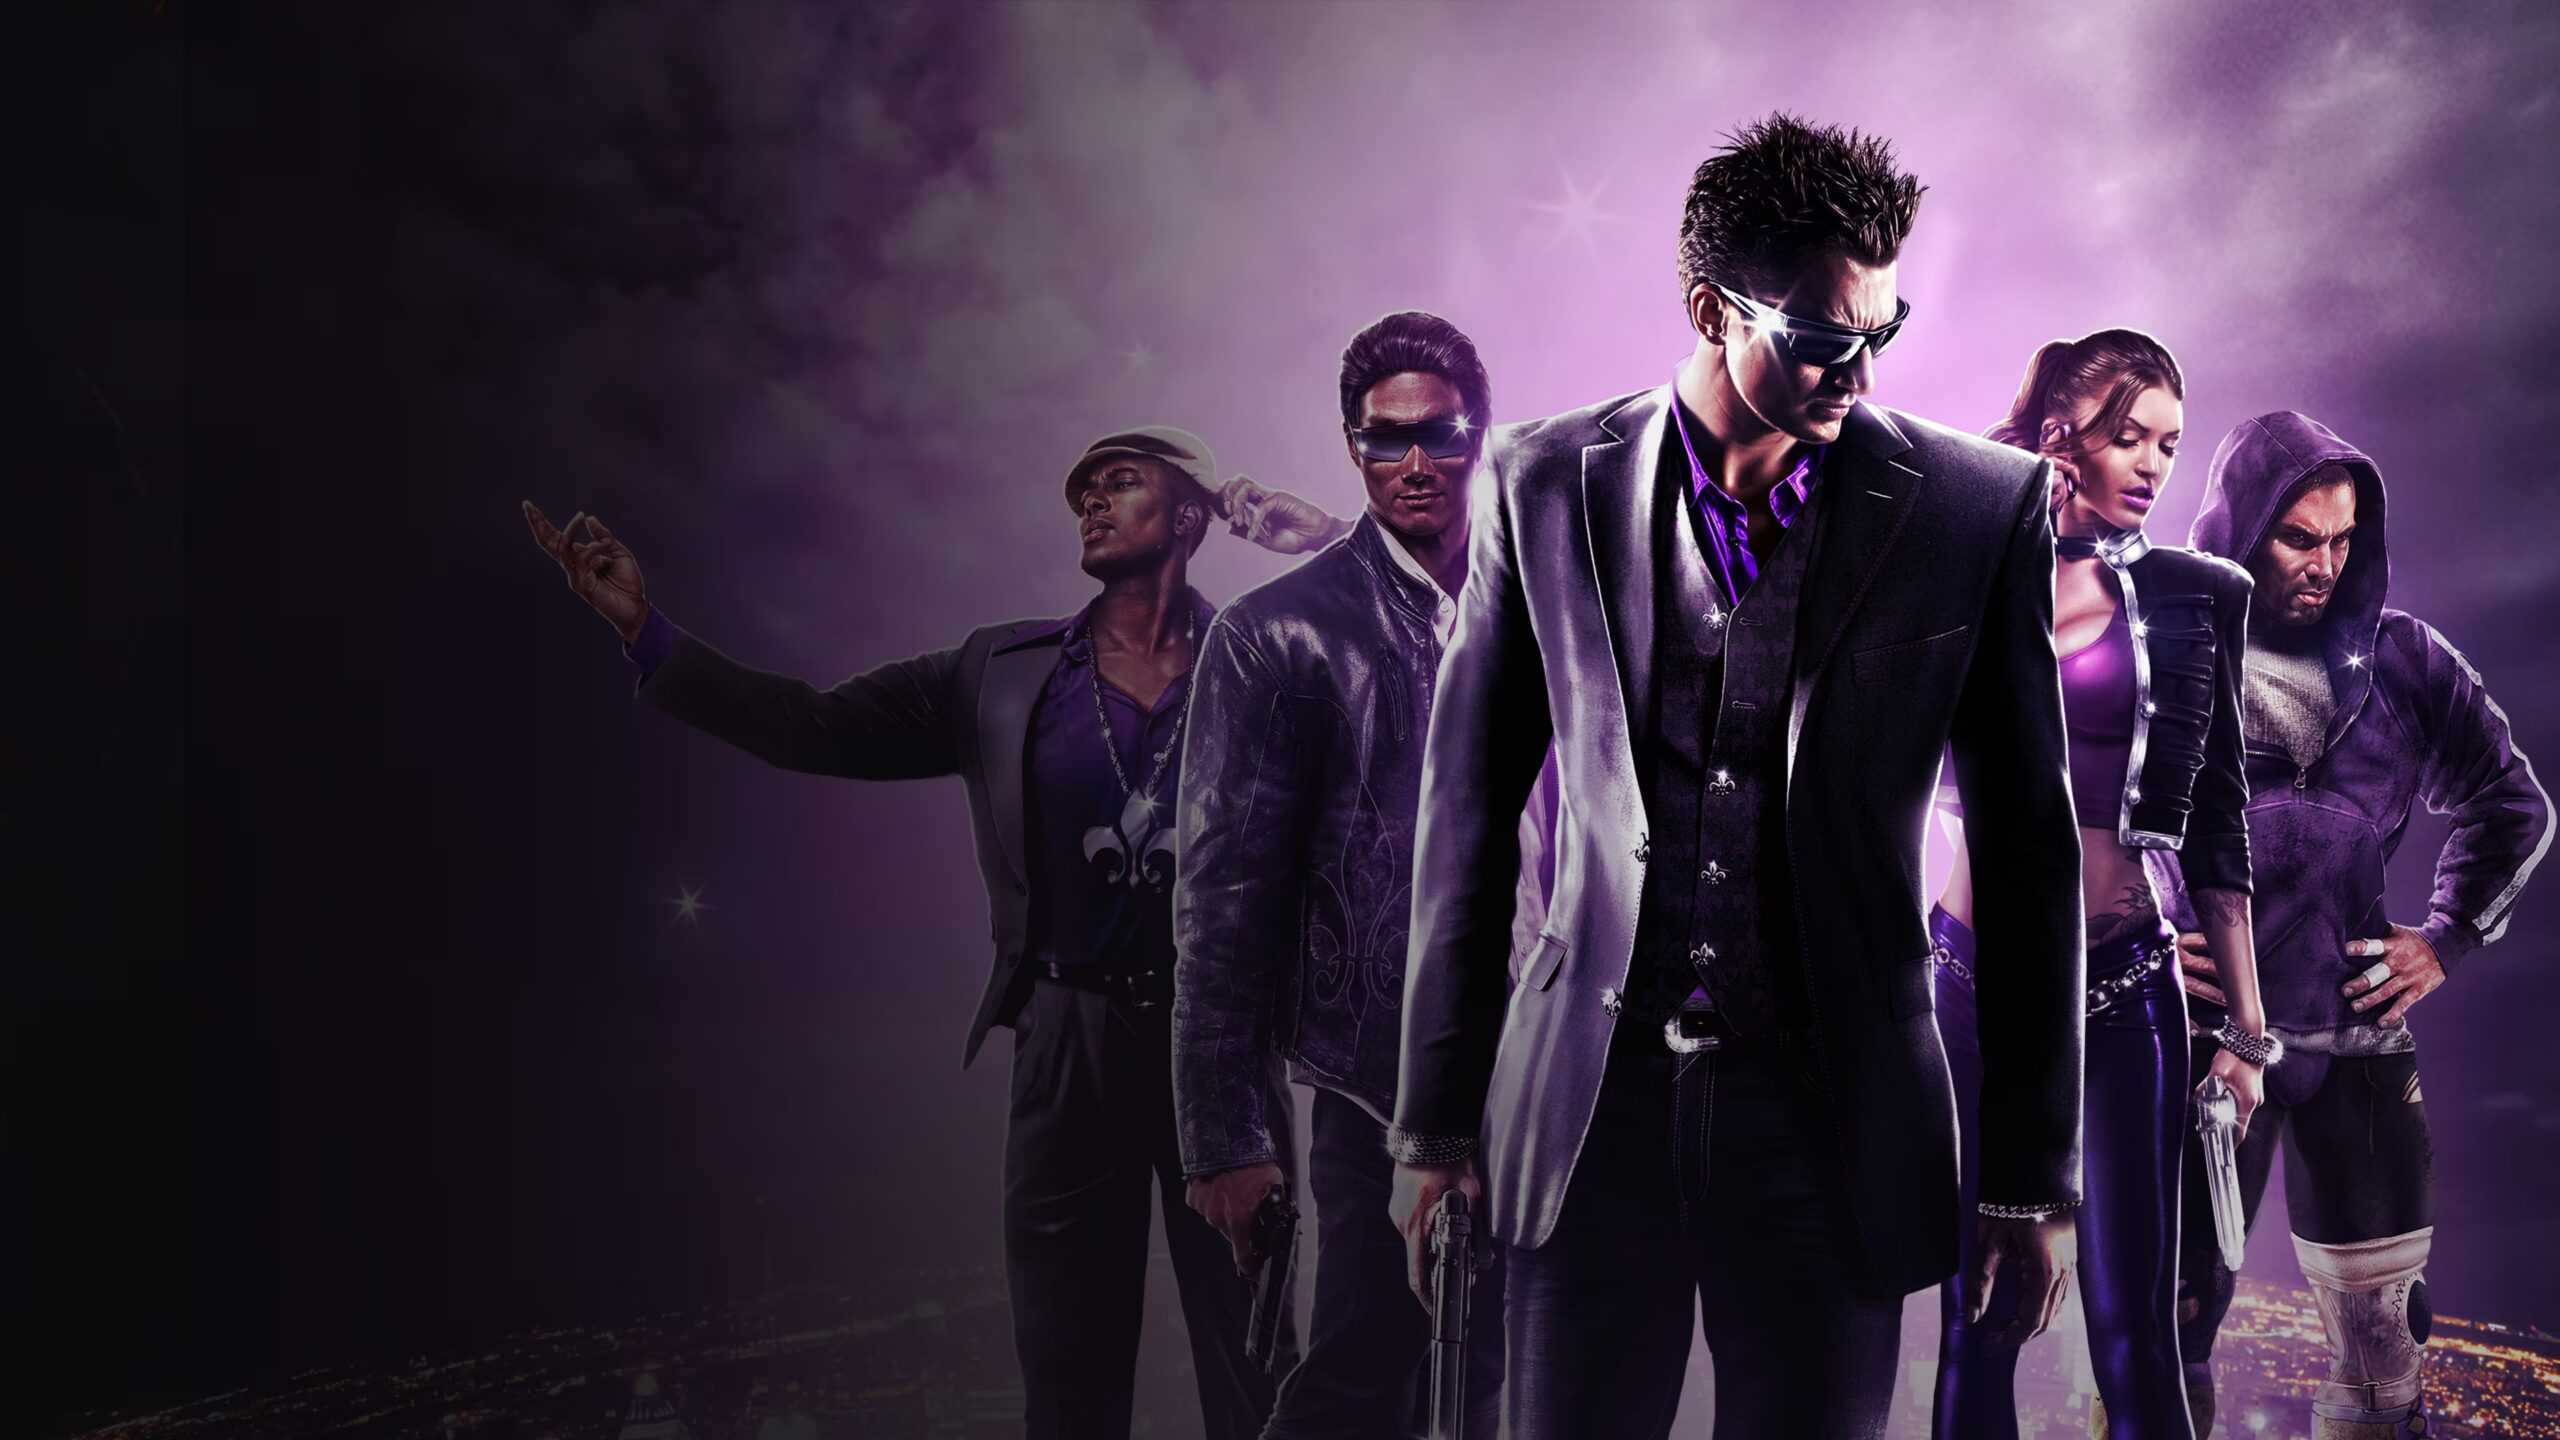 Saints Row developer has no plans to remake the games you actually liked